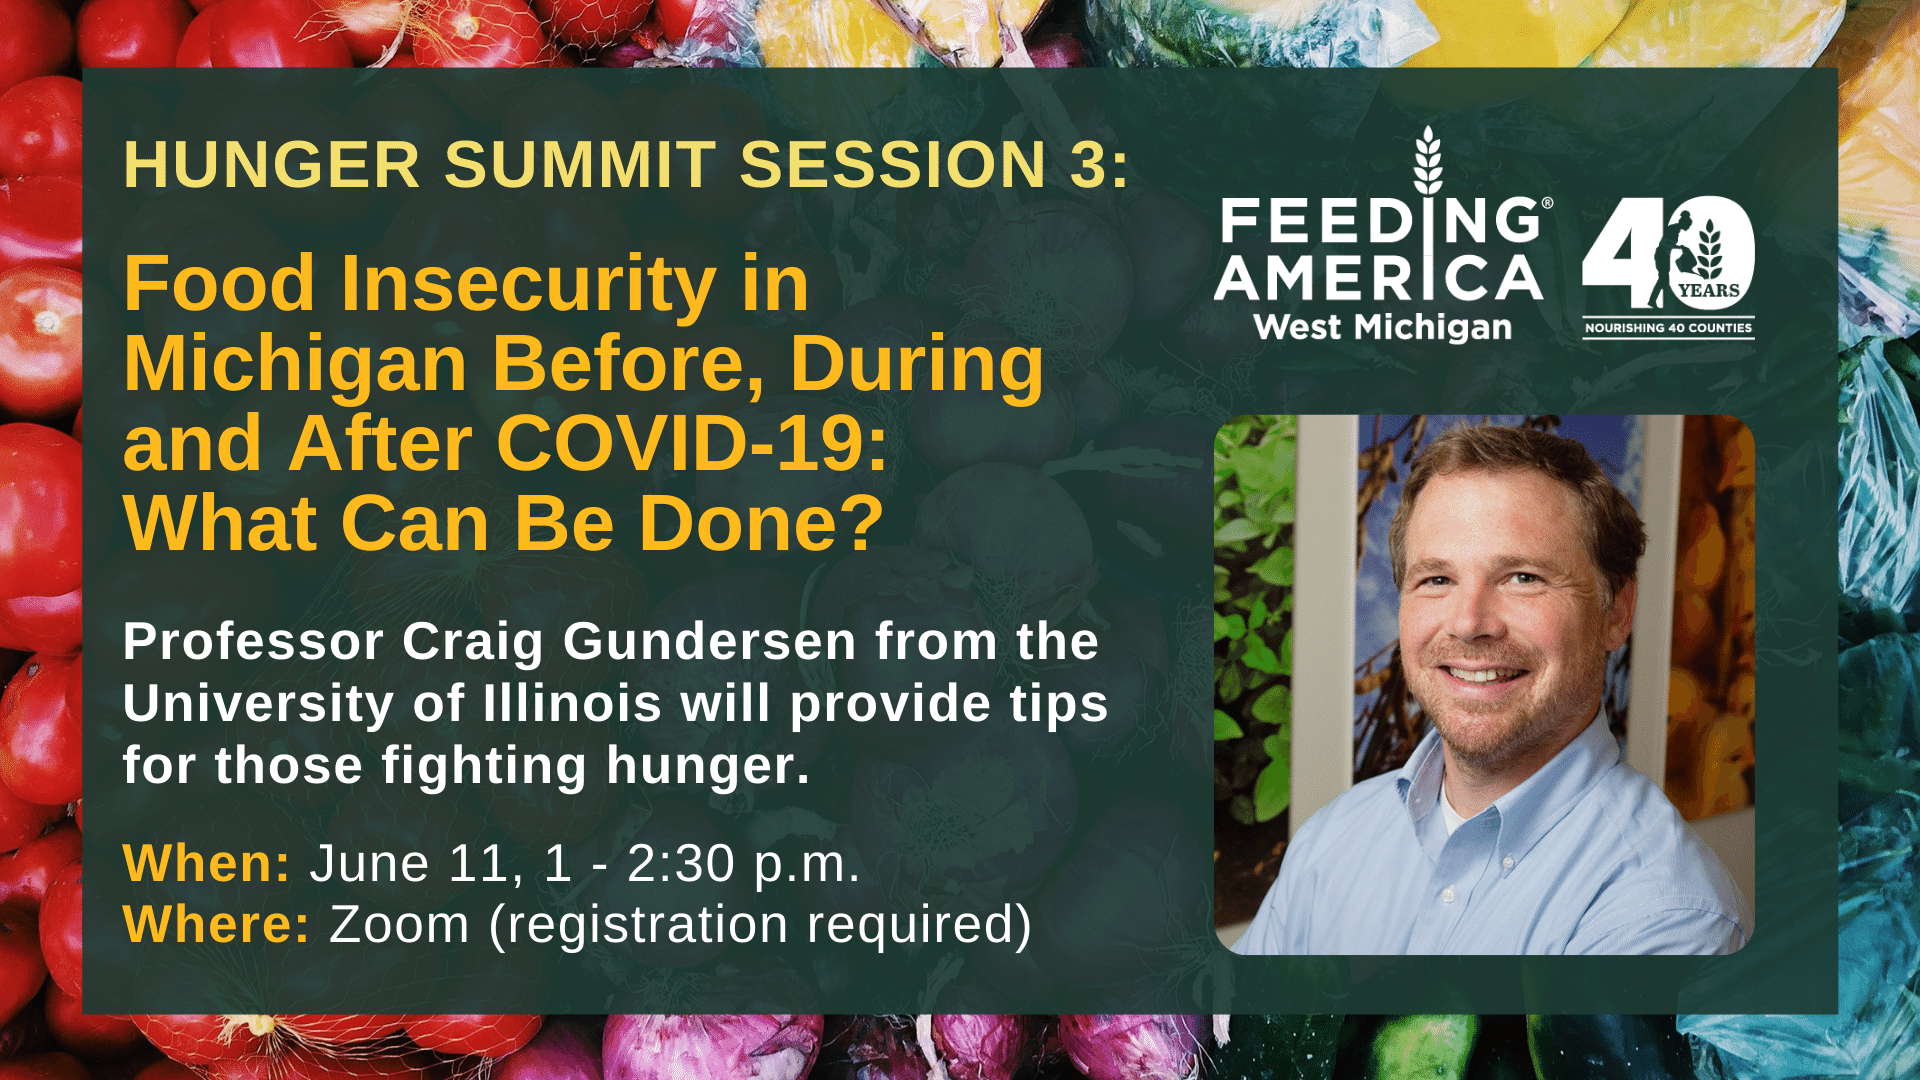 Hunger Summit Session 3 - Food Insecurity in Michigan Before, During, and After COVID-19: What Can Be Done - Profession Craig Gunderson from the University of Illinois will provide tips for those fighting hunger - June 11 1-2:30 PM on Zoom (registration required)